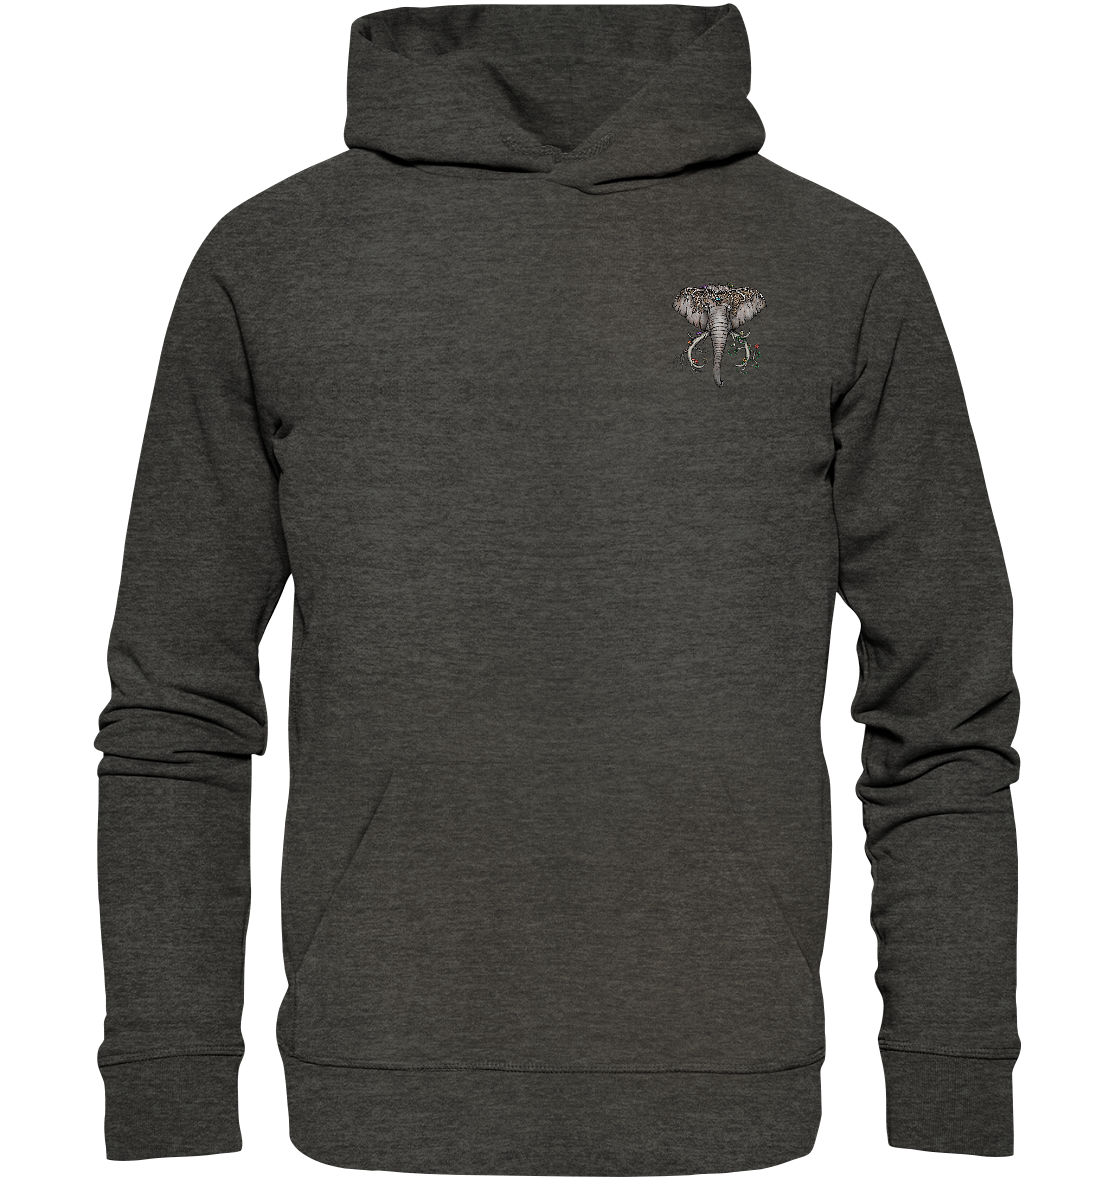 front-organic-hoodie-252625-1116x.png